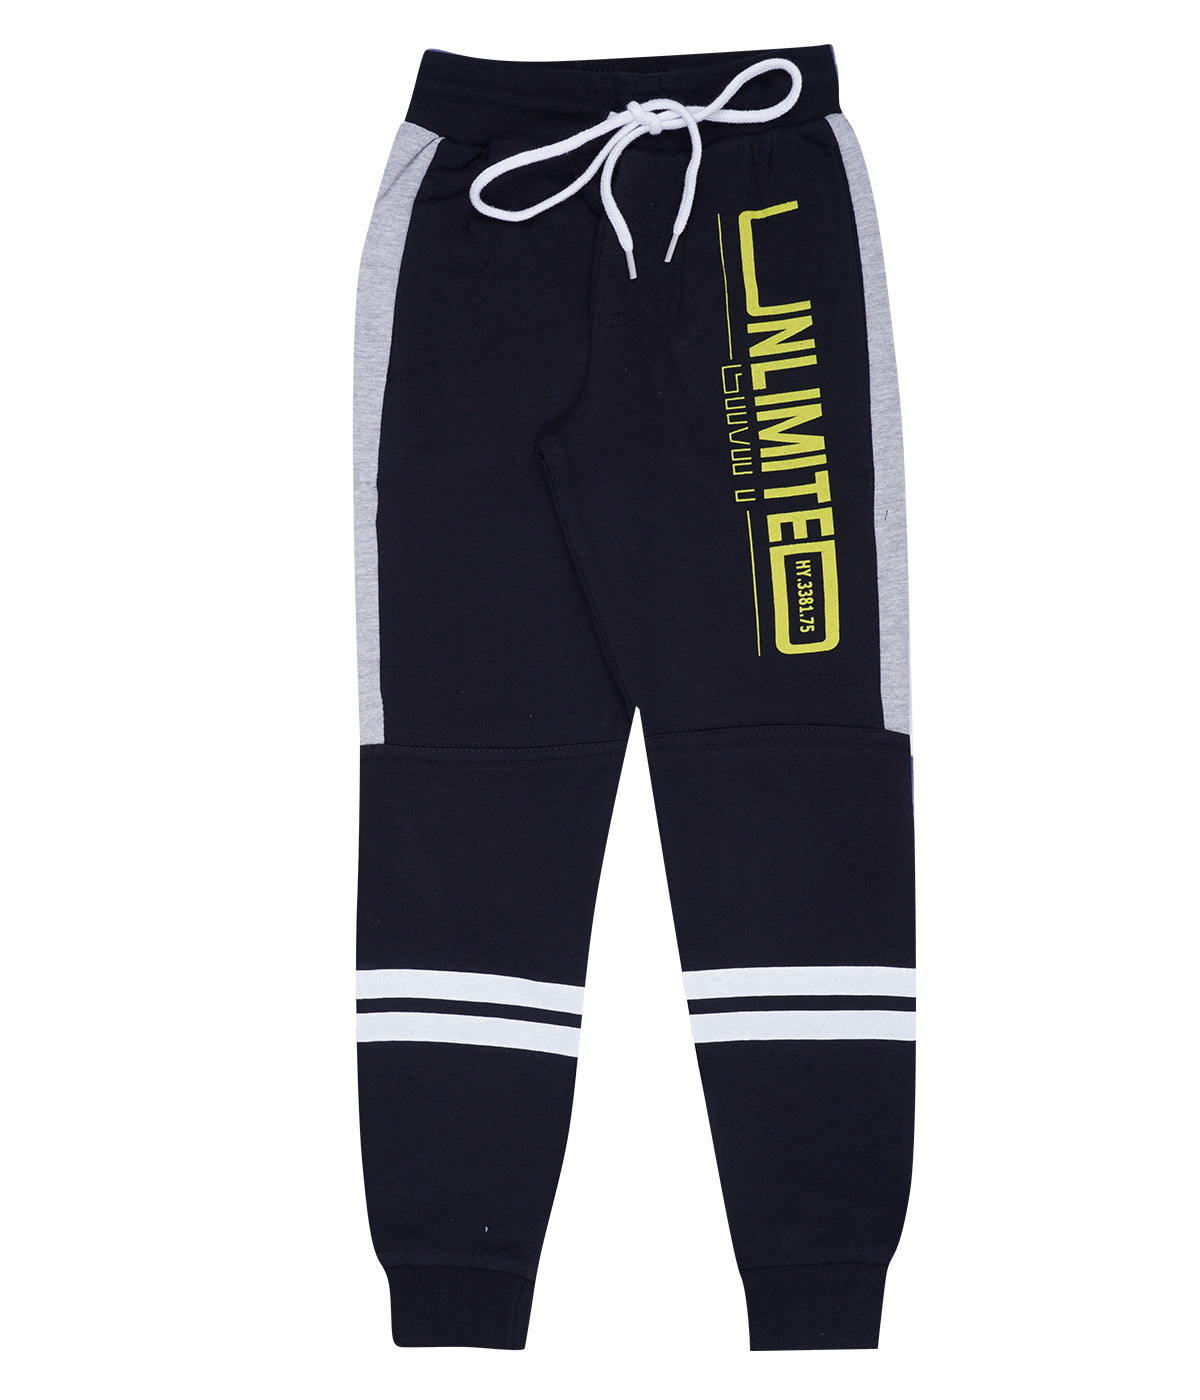 Yalzz Track Pant For Boys Multicolor Pack of 1